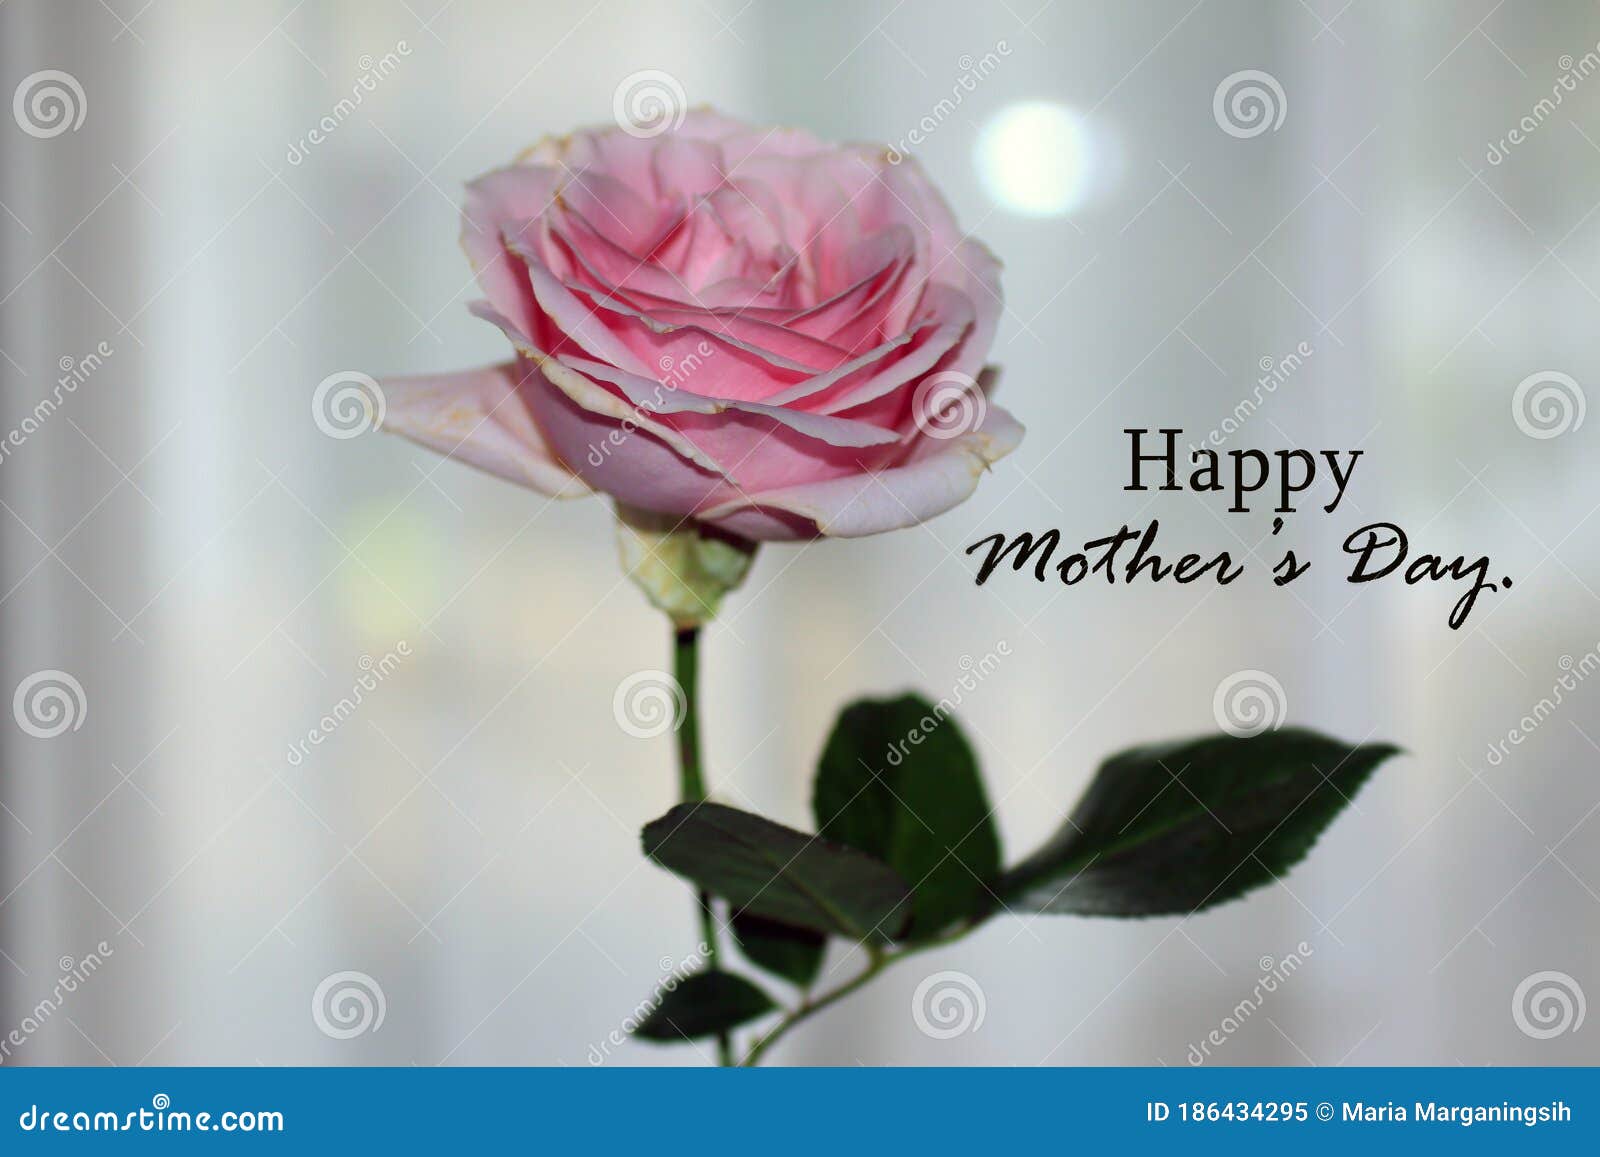 Happy Mothers Day Card Greeting with Beautiful Single Pink Rose ...